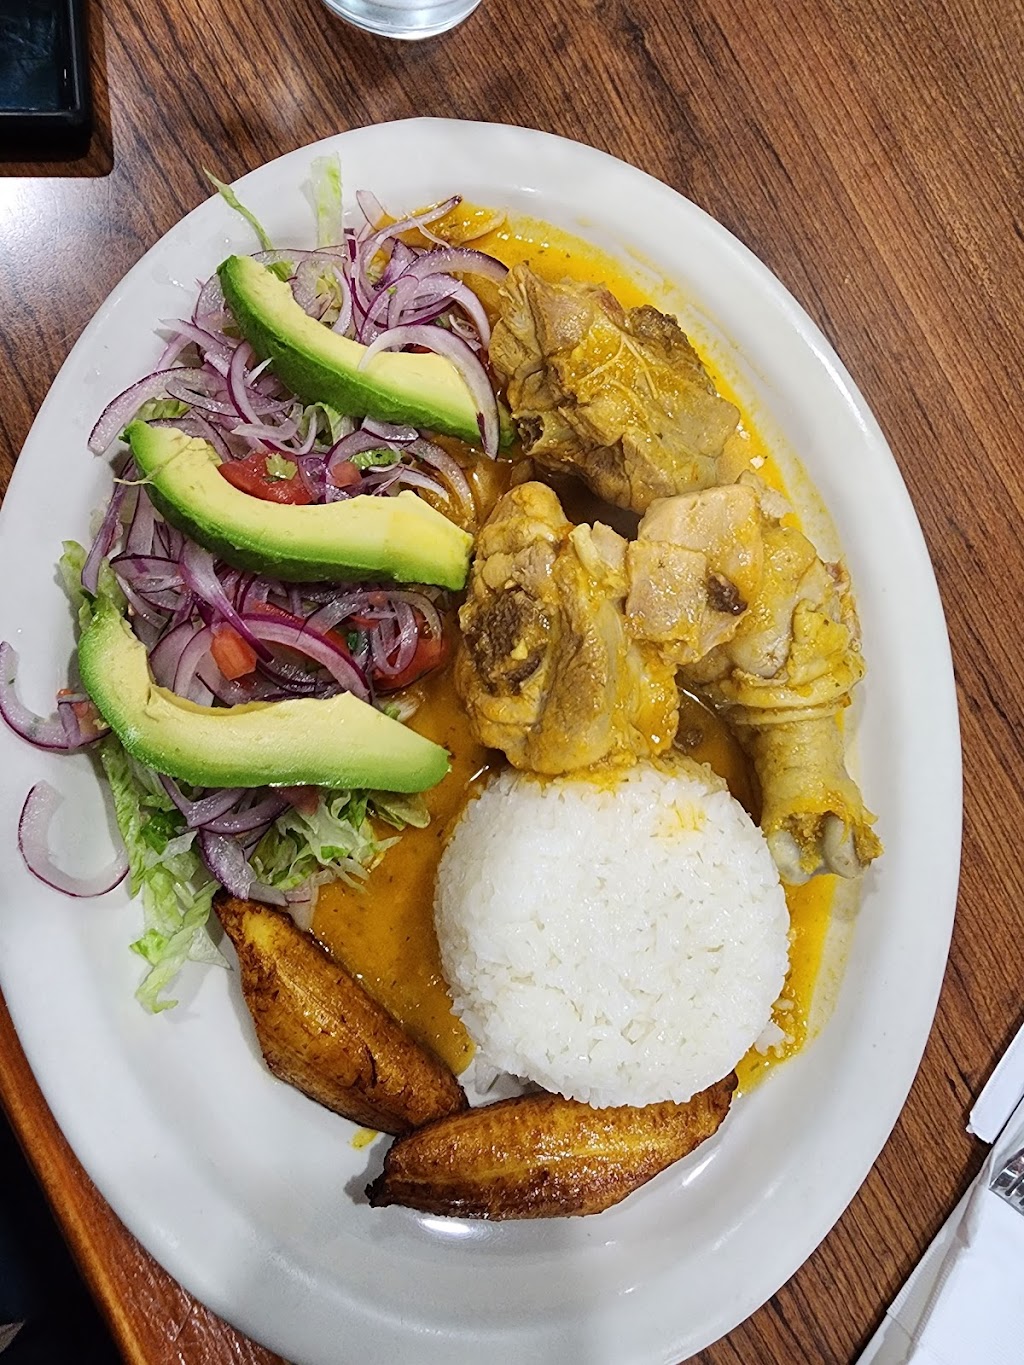 El Paraiso Restaurant & lounge | 23 Kennedy Dr, Spring Valley, NY 10977 | Phone: (845) 352-3966